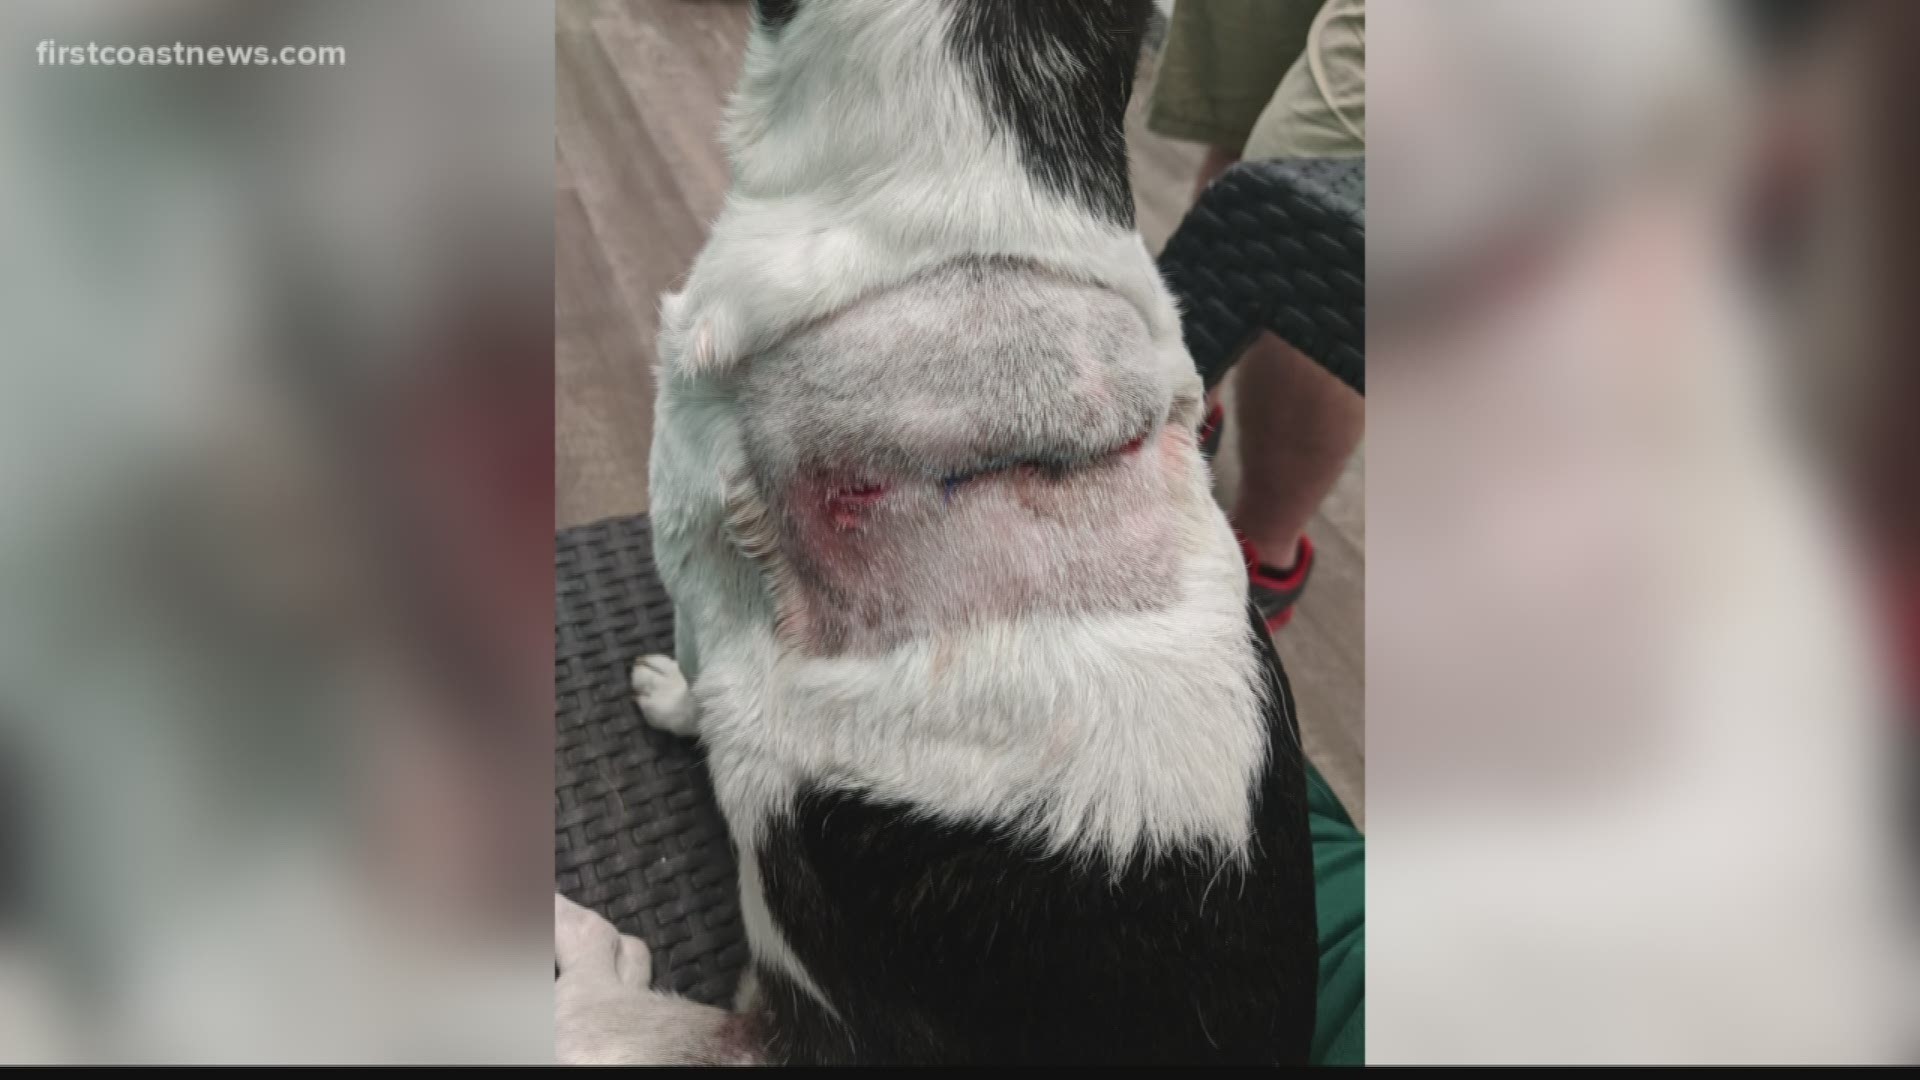 "There are two vicious dogs roaming the neighborhood. Once they pulled her through the fence they shook her and then just turned around and ran with her."